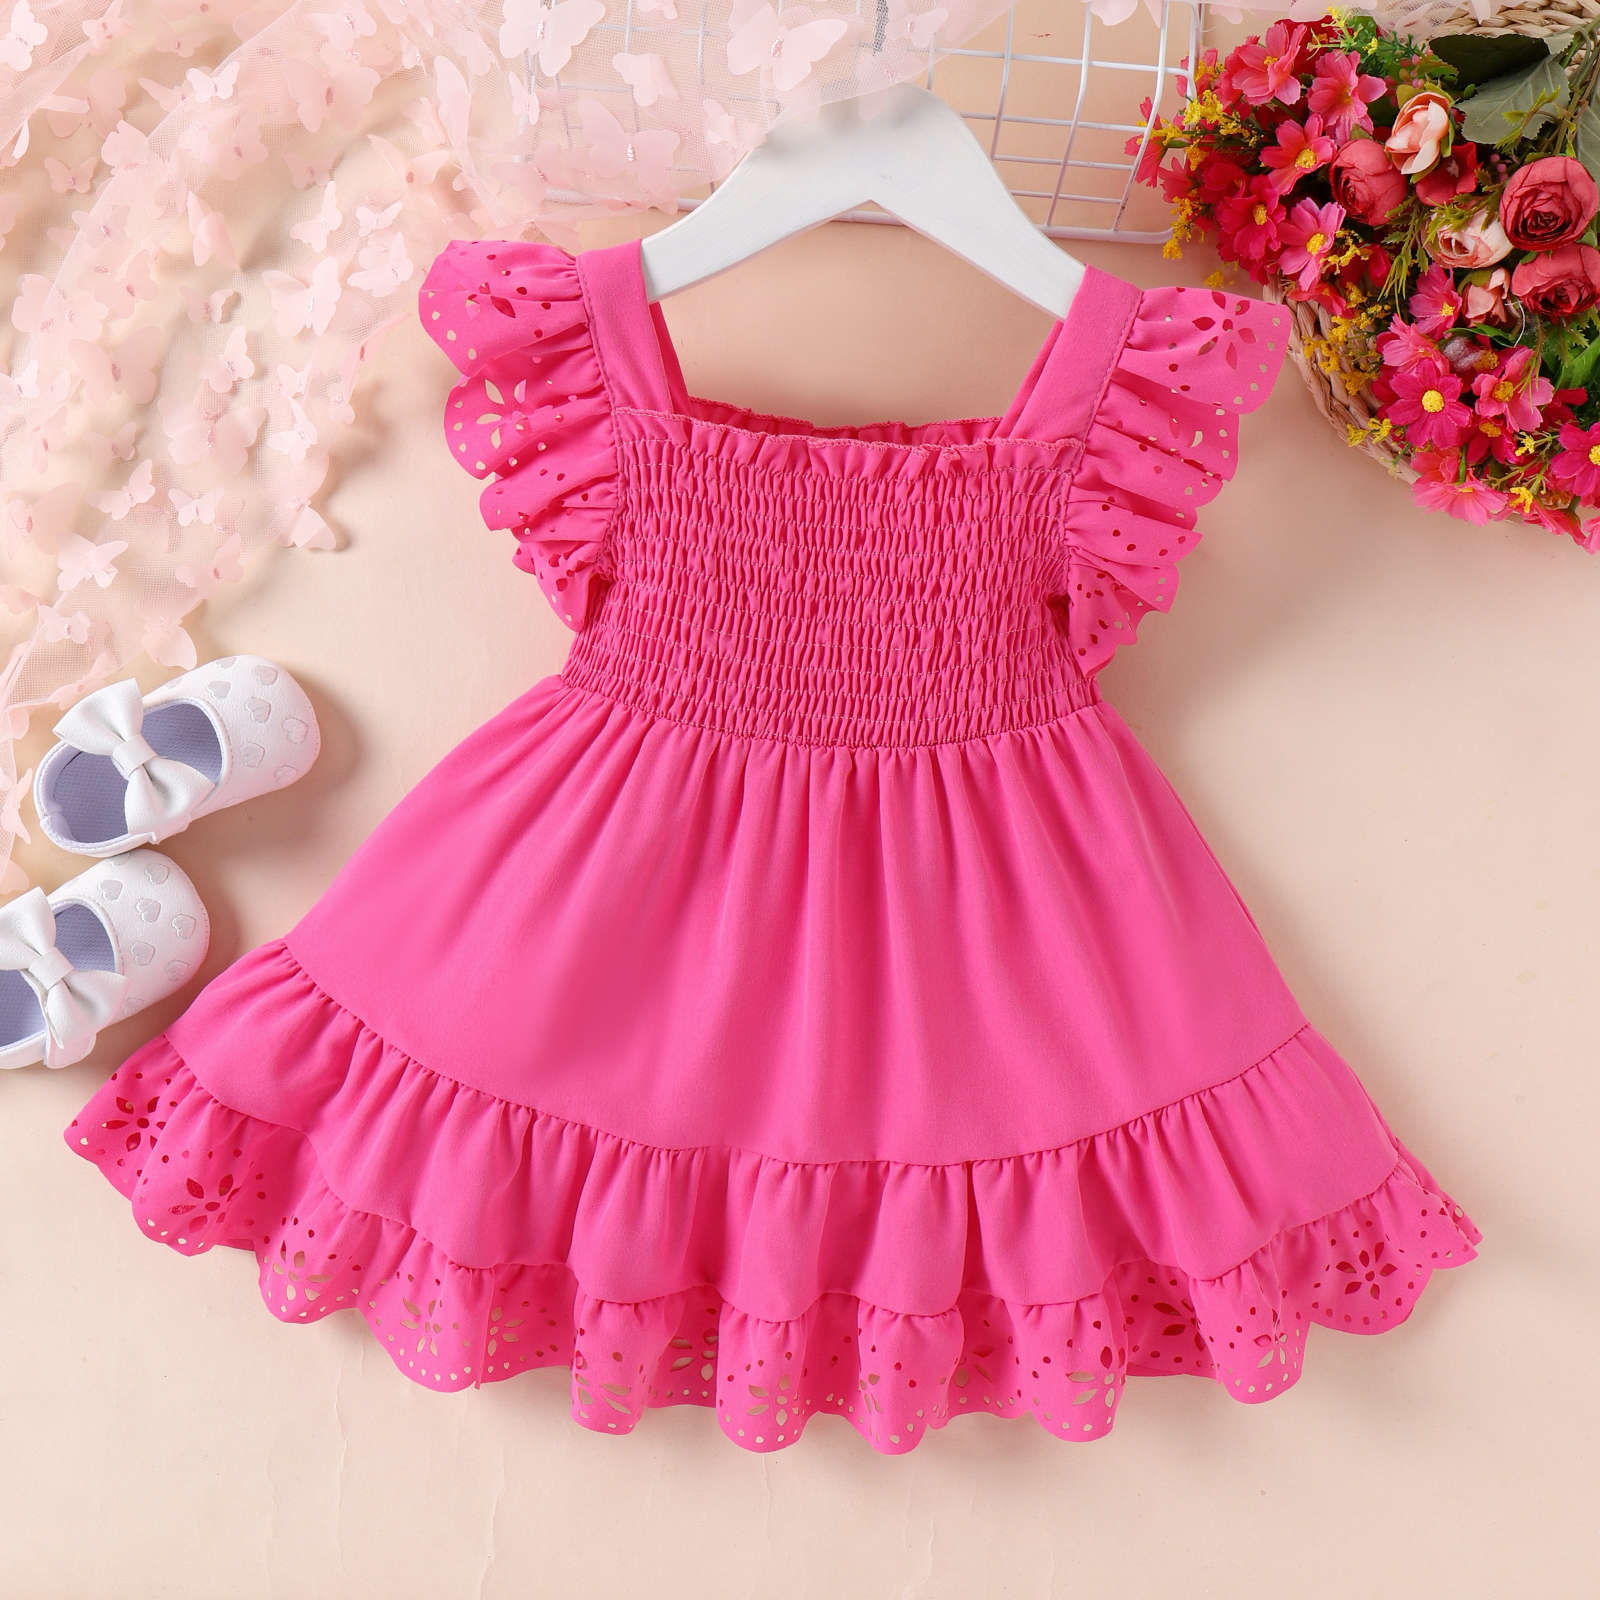 Baoxin children's clothing European and...